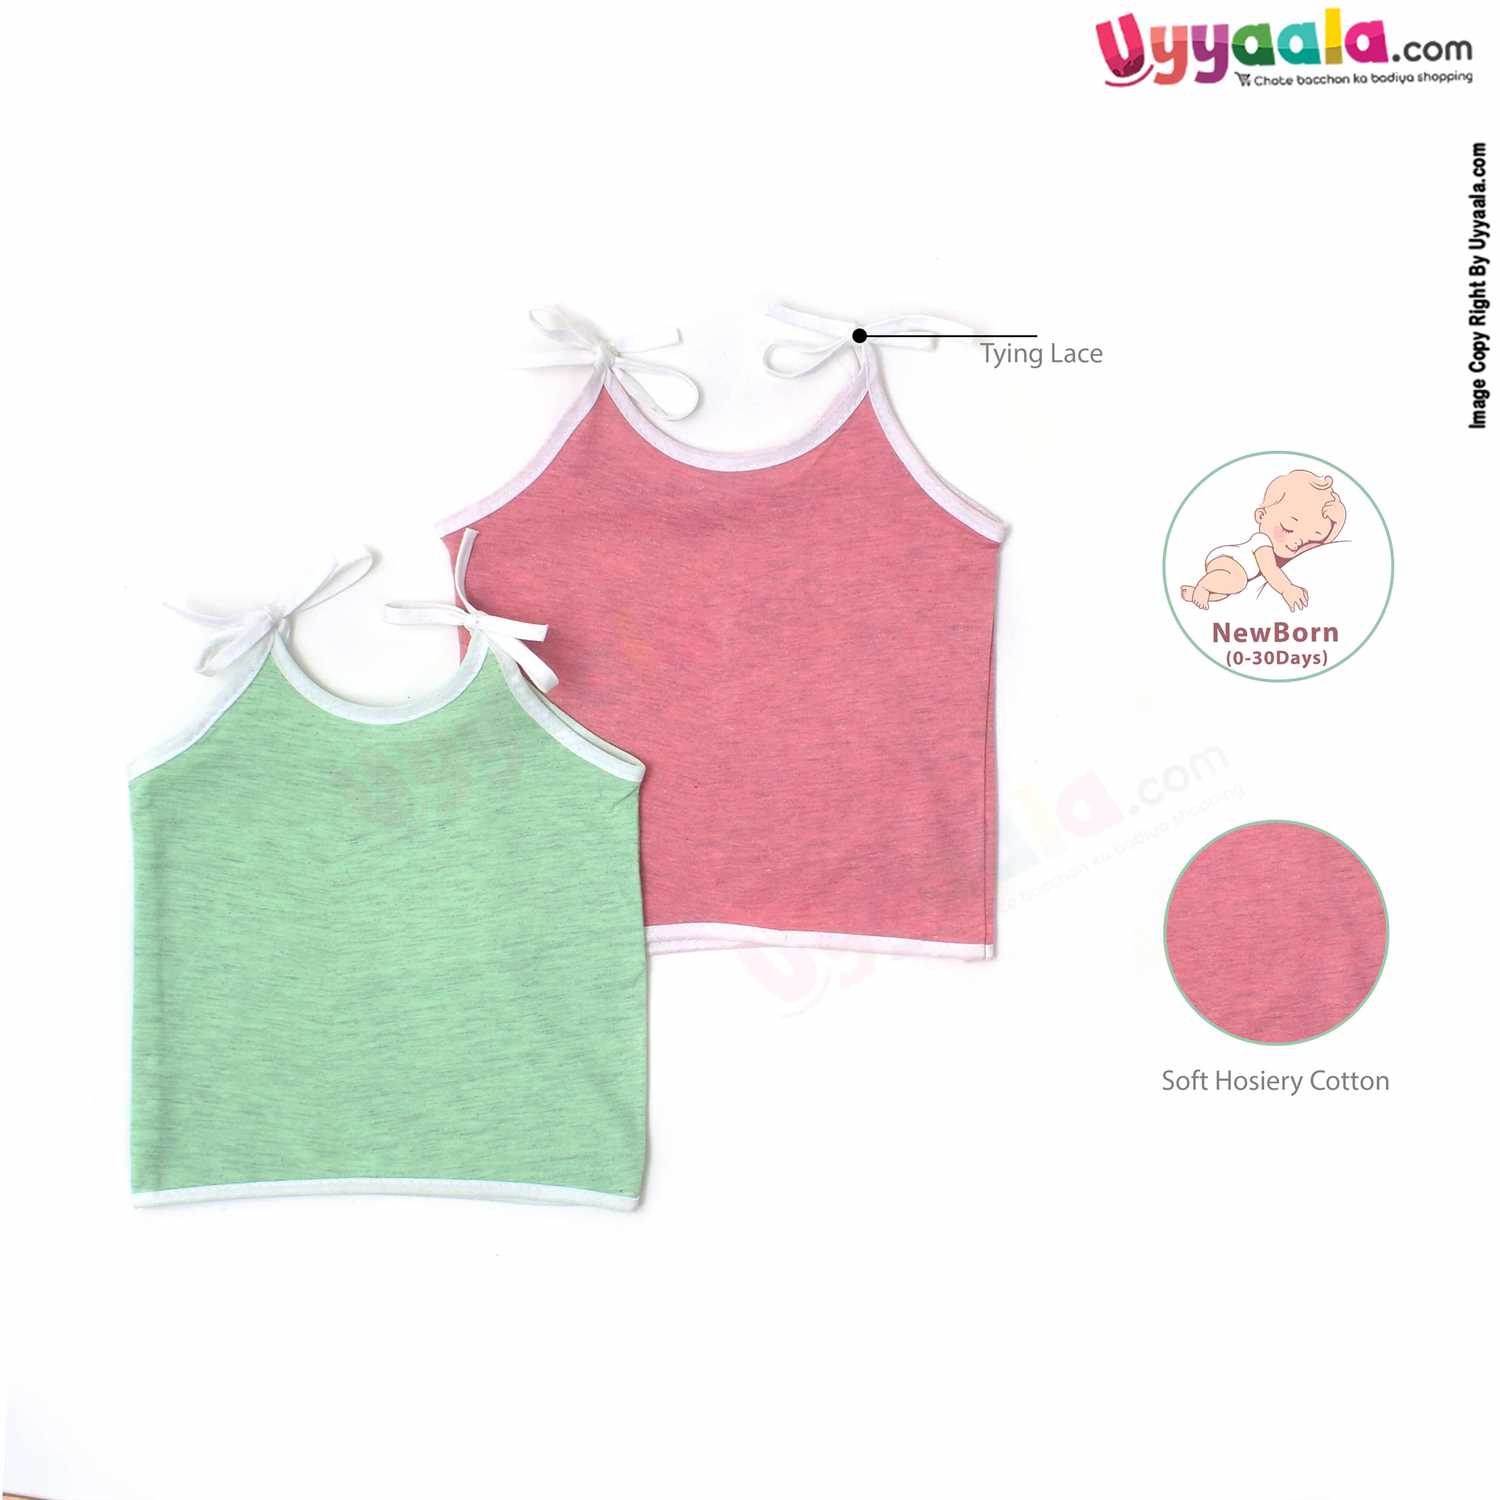 SNUG UP Sleeveless Baby Jabla Set, Top Opening Tie knot Lace Model, Premium Quality Cotton Baby Wear, (0-30 Days), 2Pack - Pink & Green